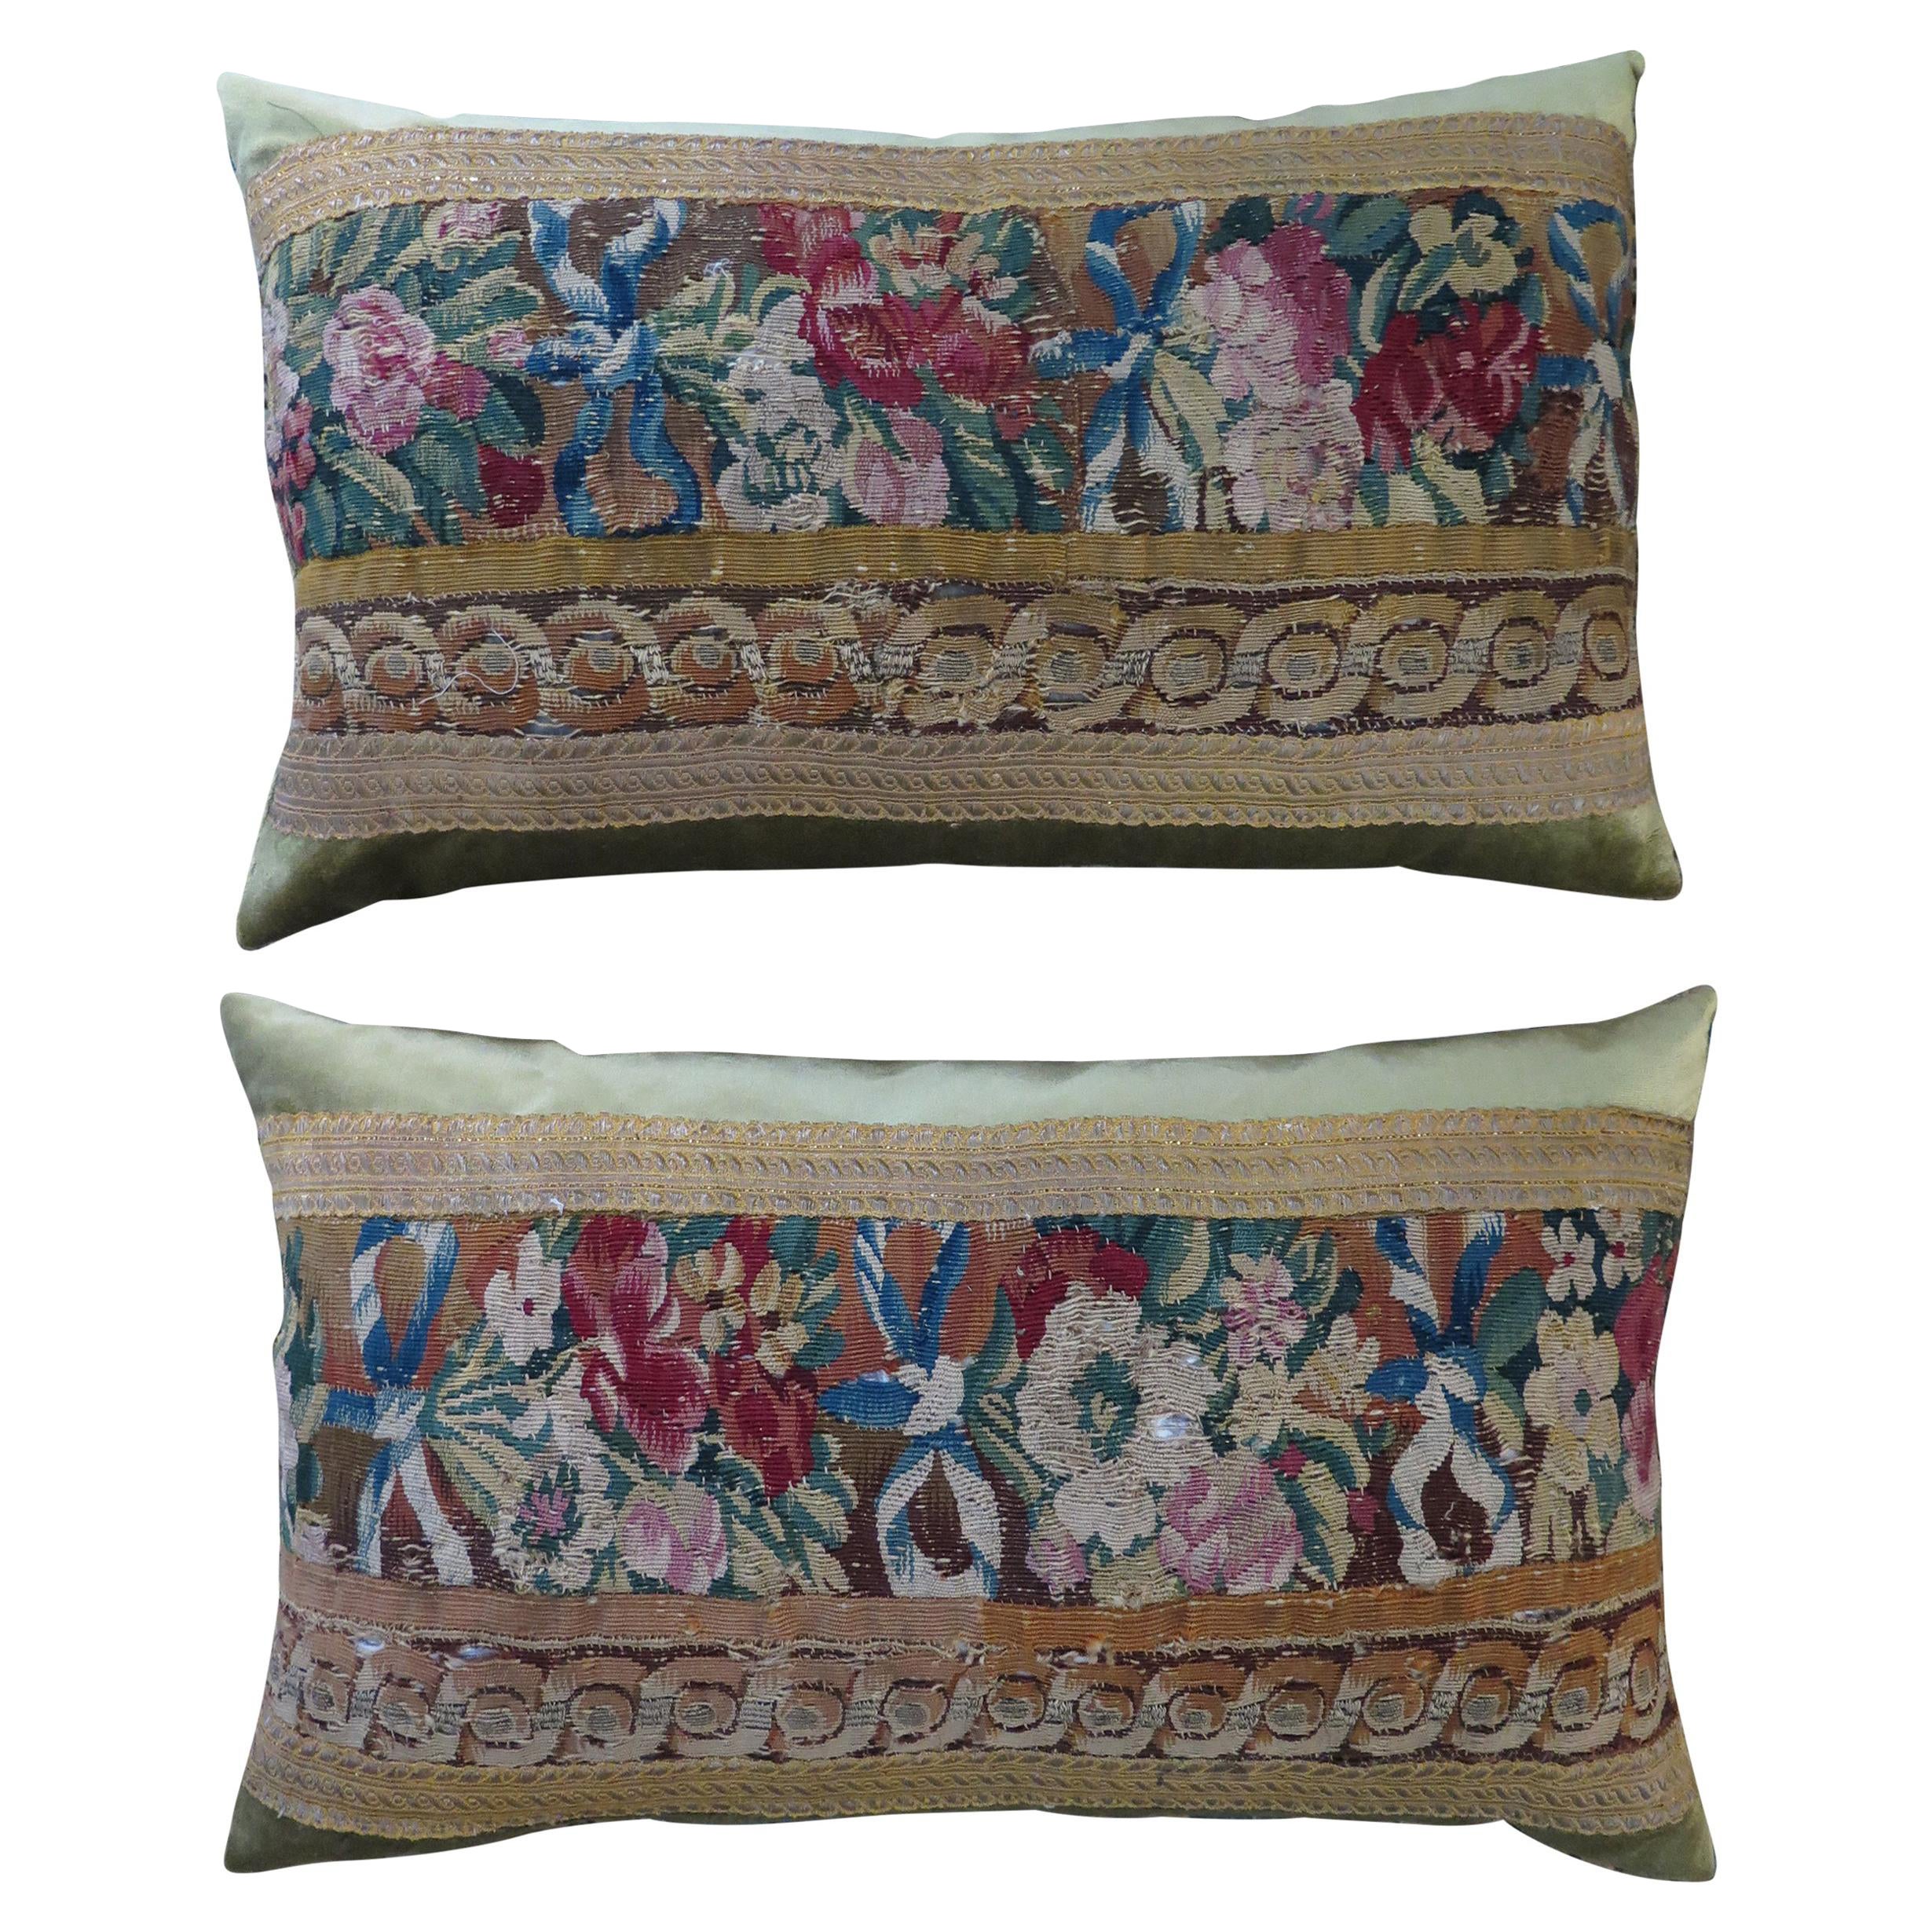 18th Century Tapestry Fragment Pillow